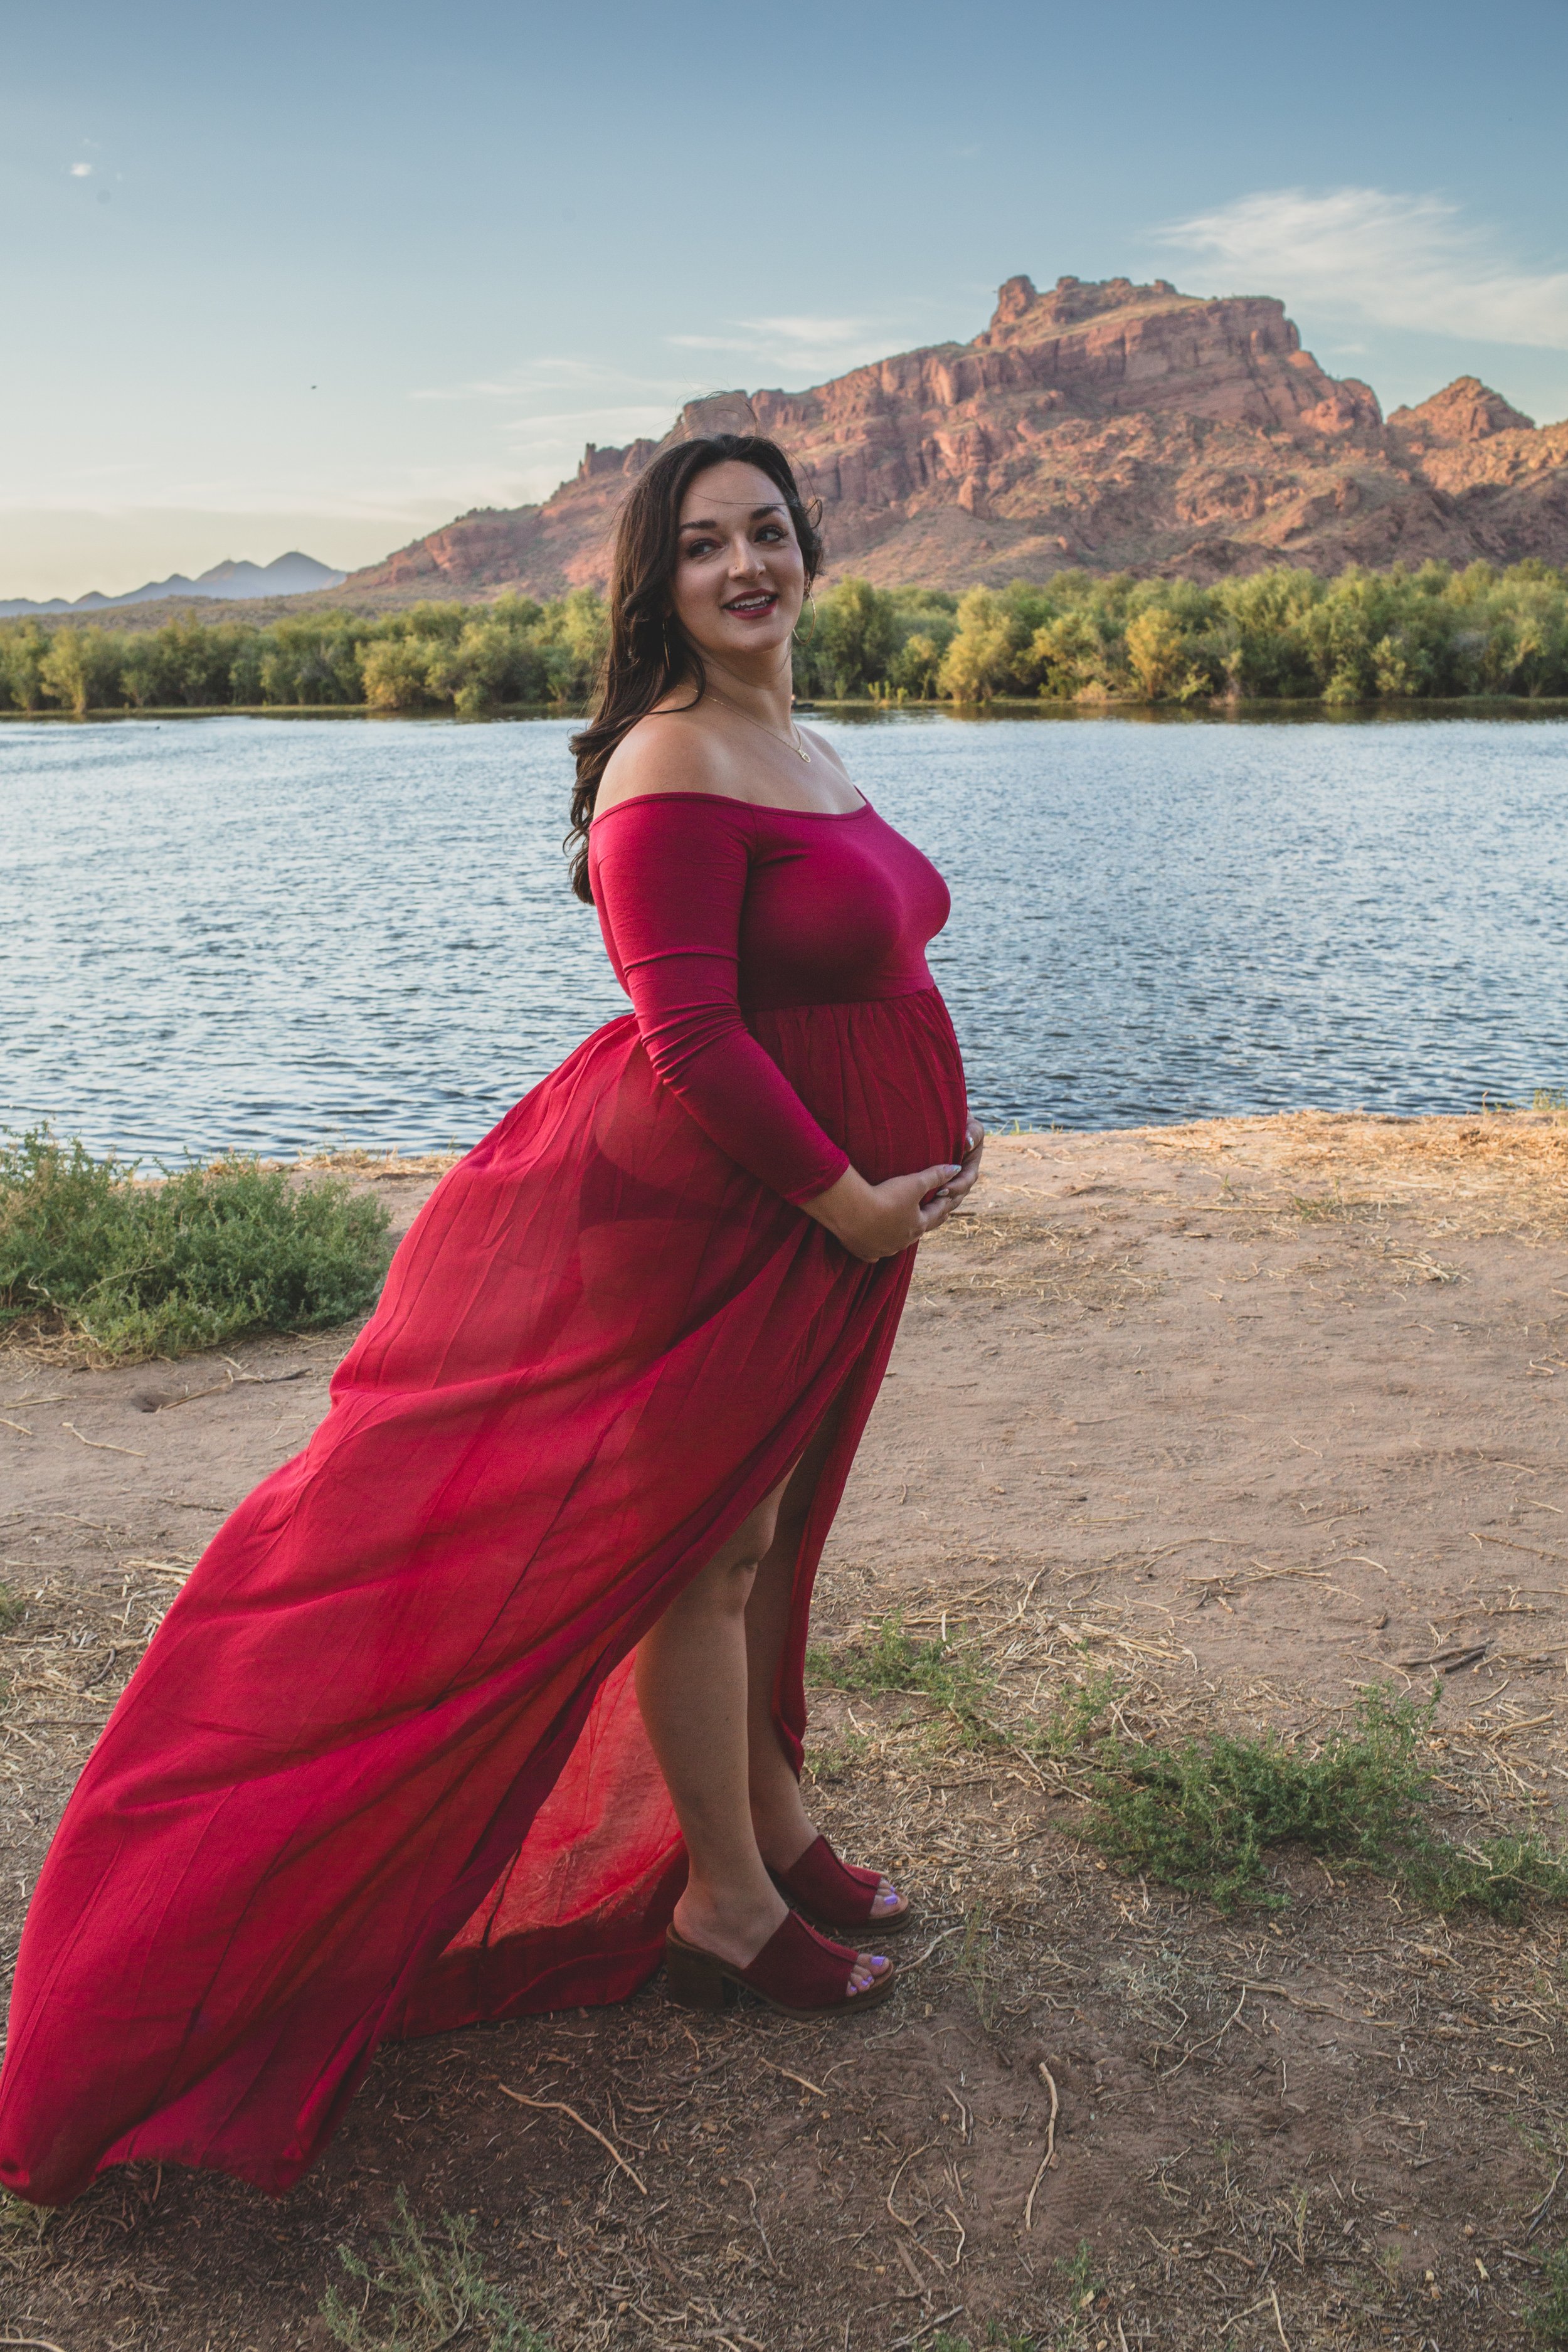 Pregnant woman stands in a red dress for candid maternity photos in front of the Salt River and mountain by the best maternity photographer in Phoenix; Jennifer Lind Schutsky.